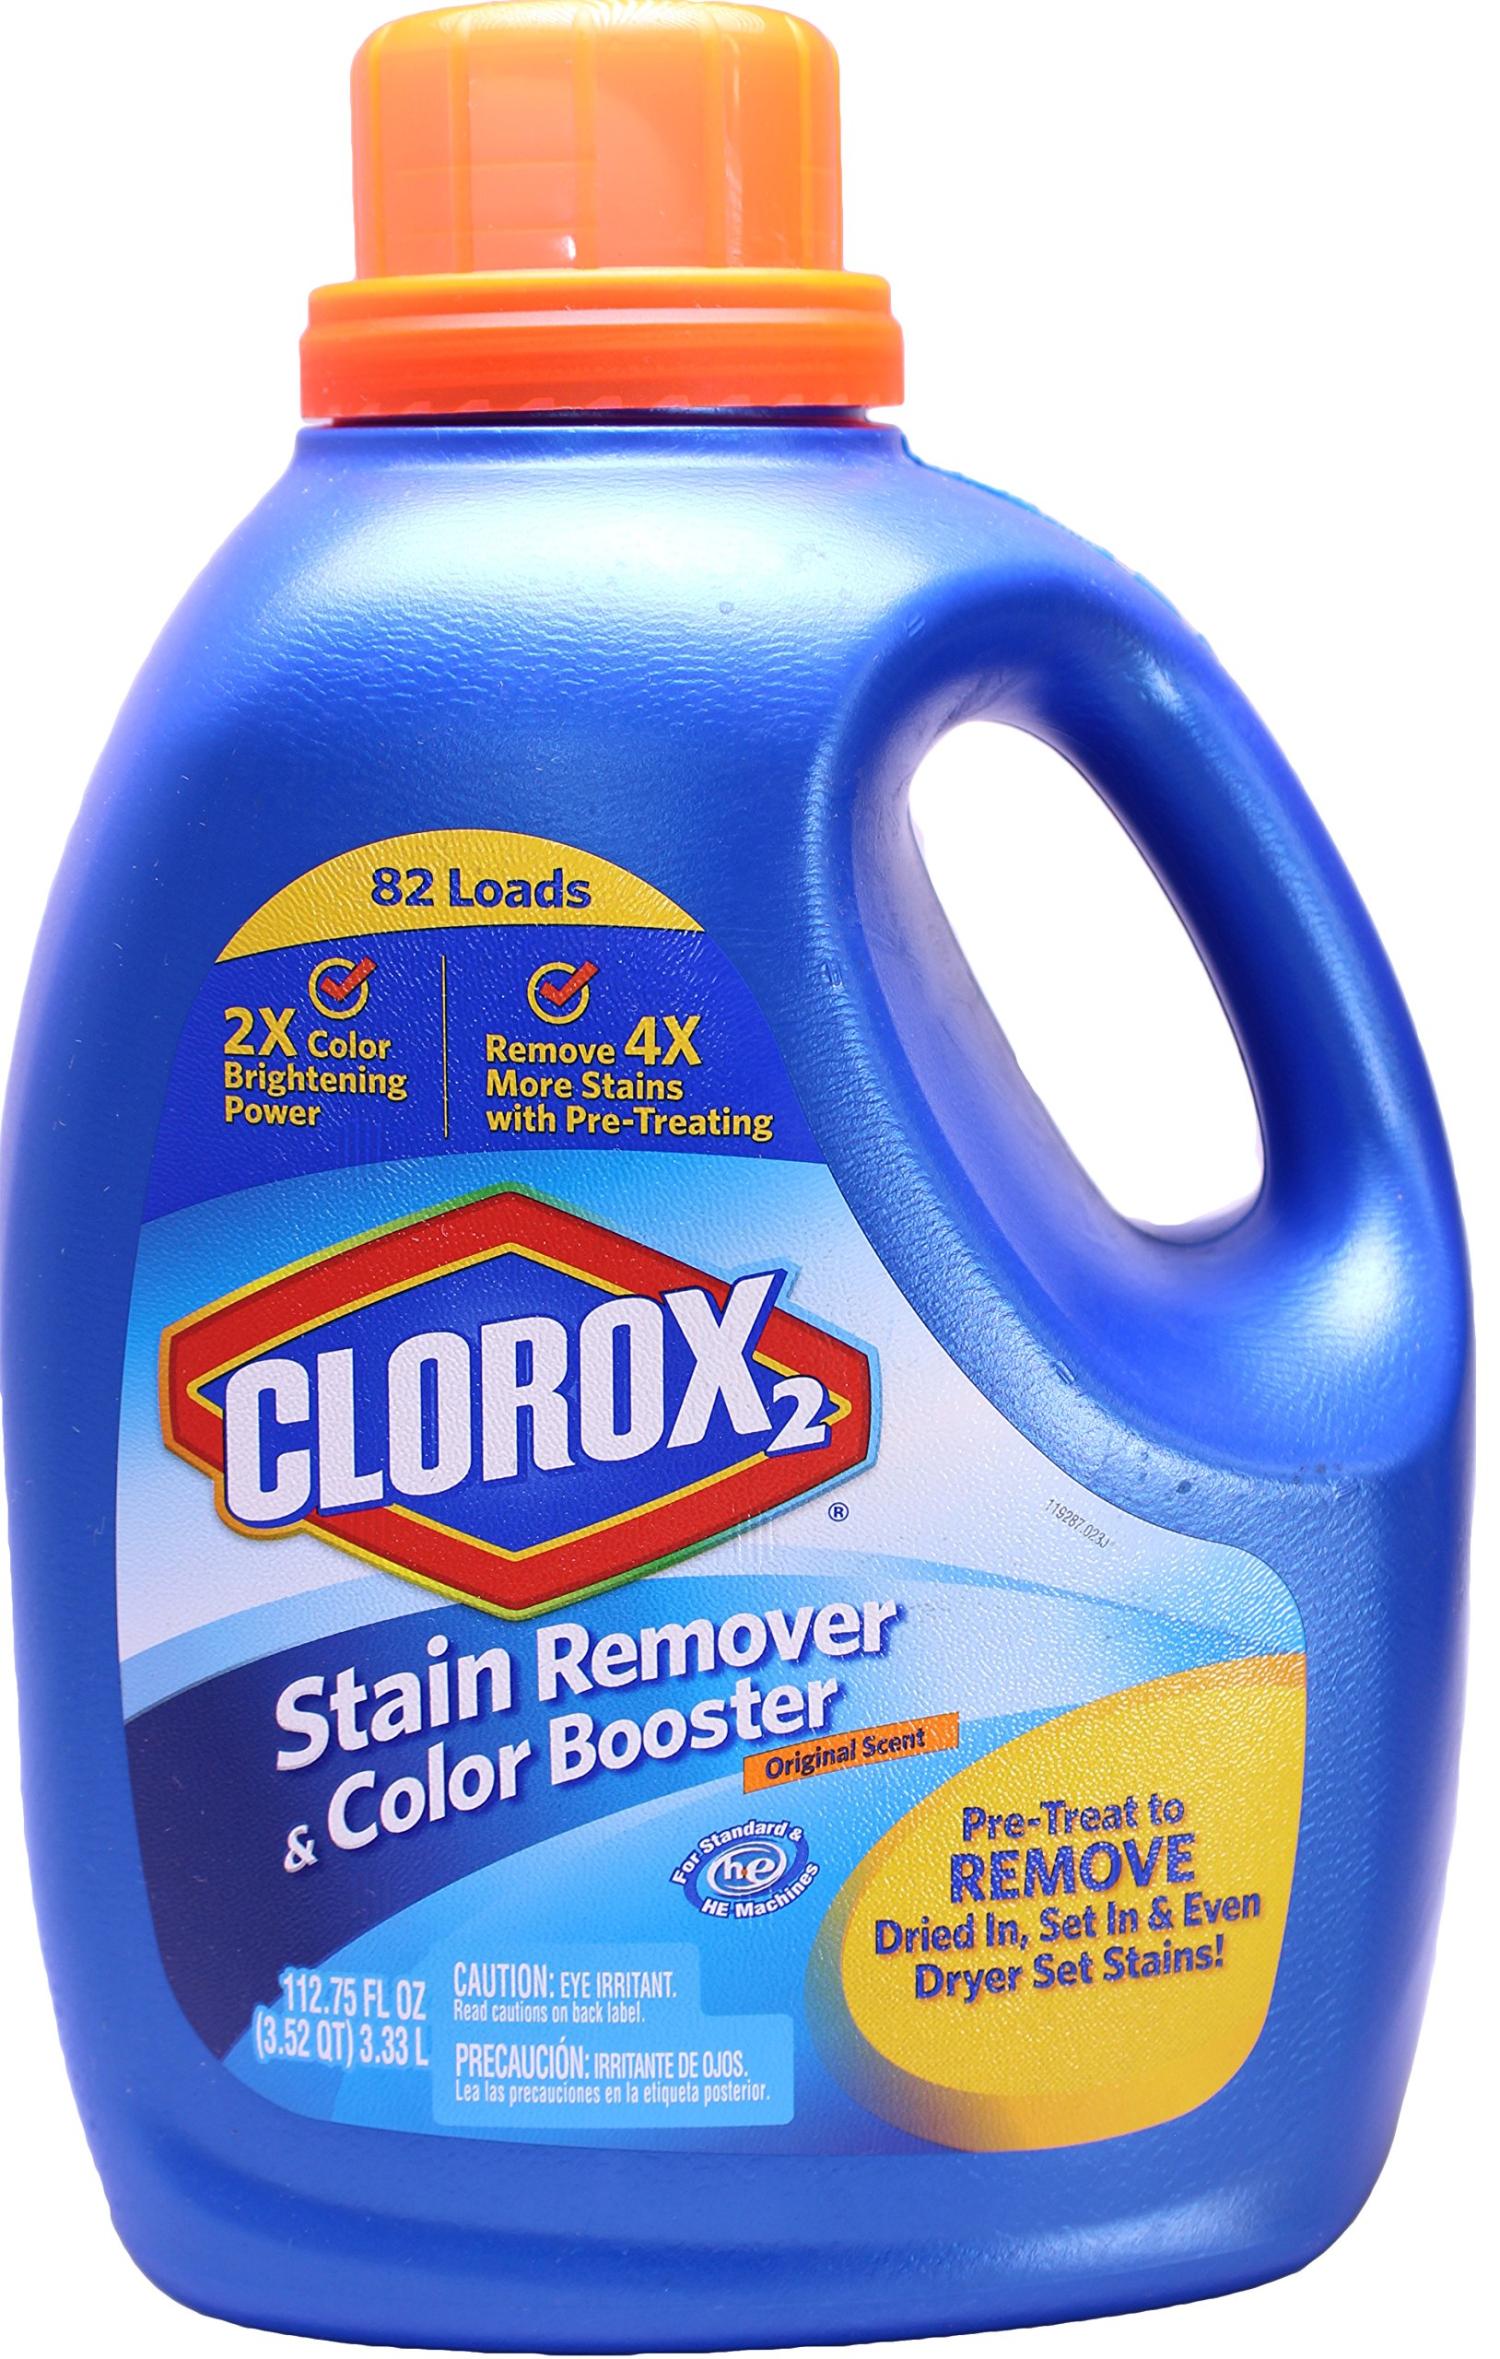 Clorox 2 STAIN REMOVER AND COLOR BOOSTER, UNSCENTED, 33 OZ BOTTLE